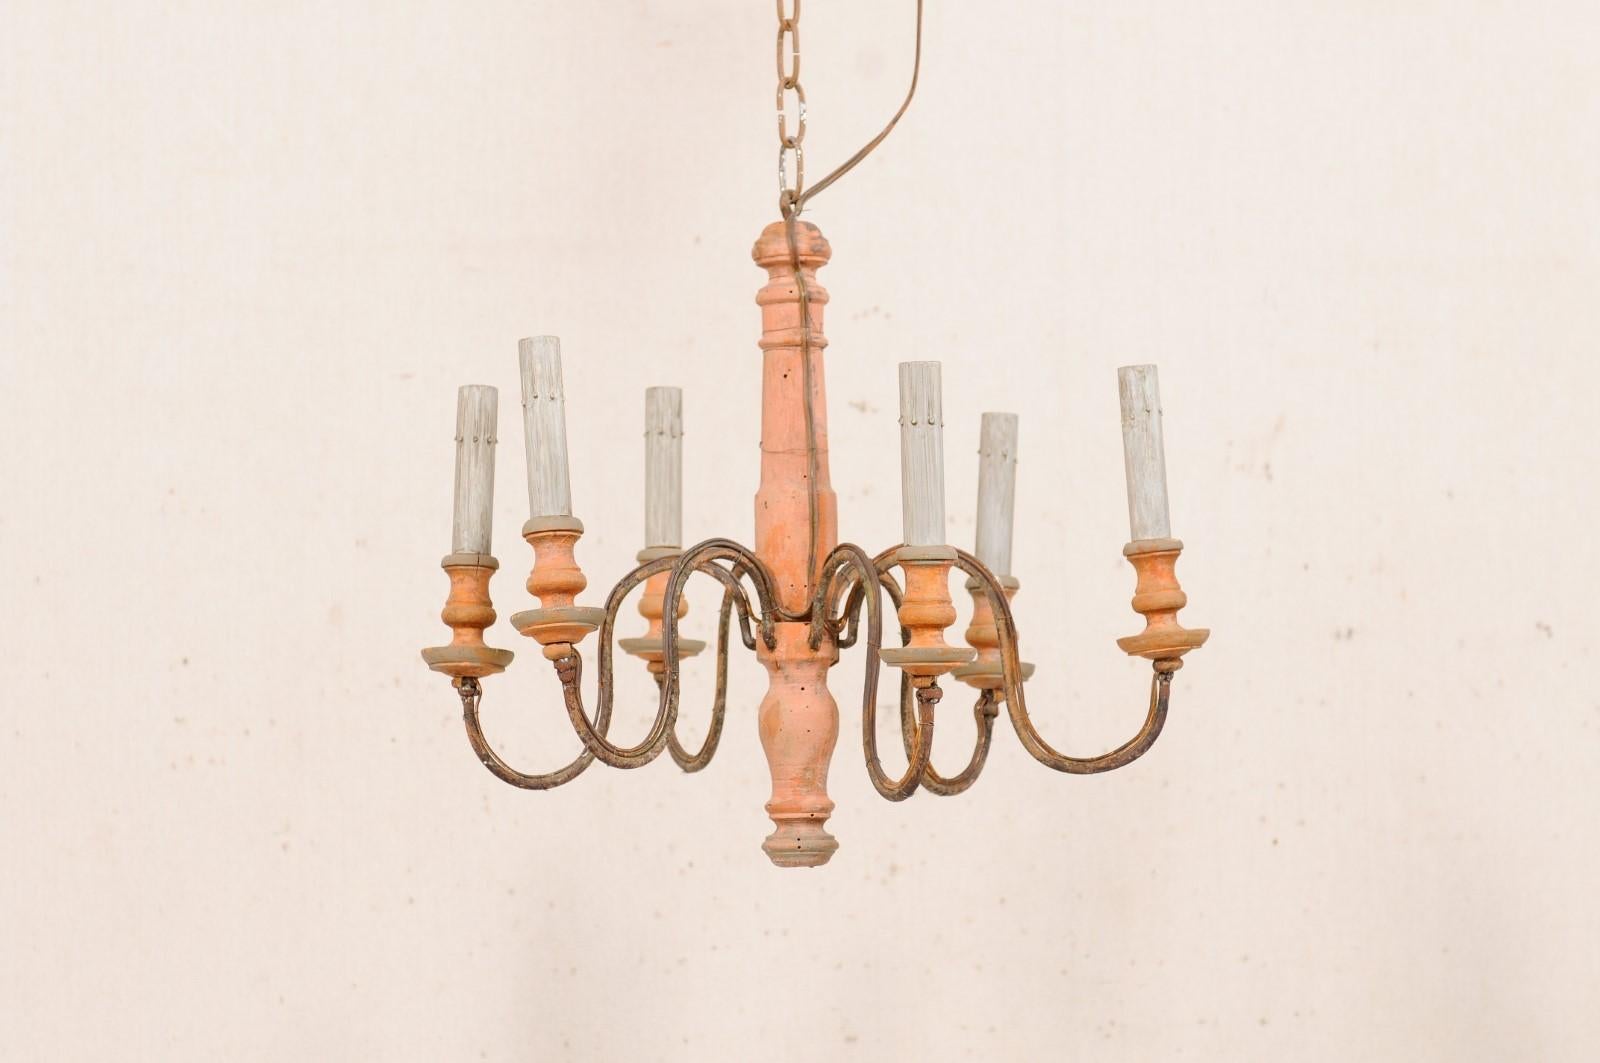 20th Century French Pair of Six-Light Wood Column Chandeliers with Iron Arms, Wired for US